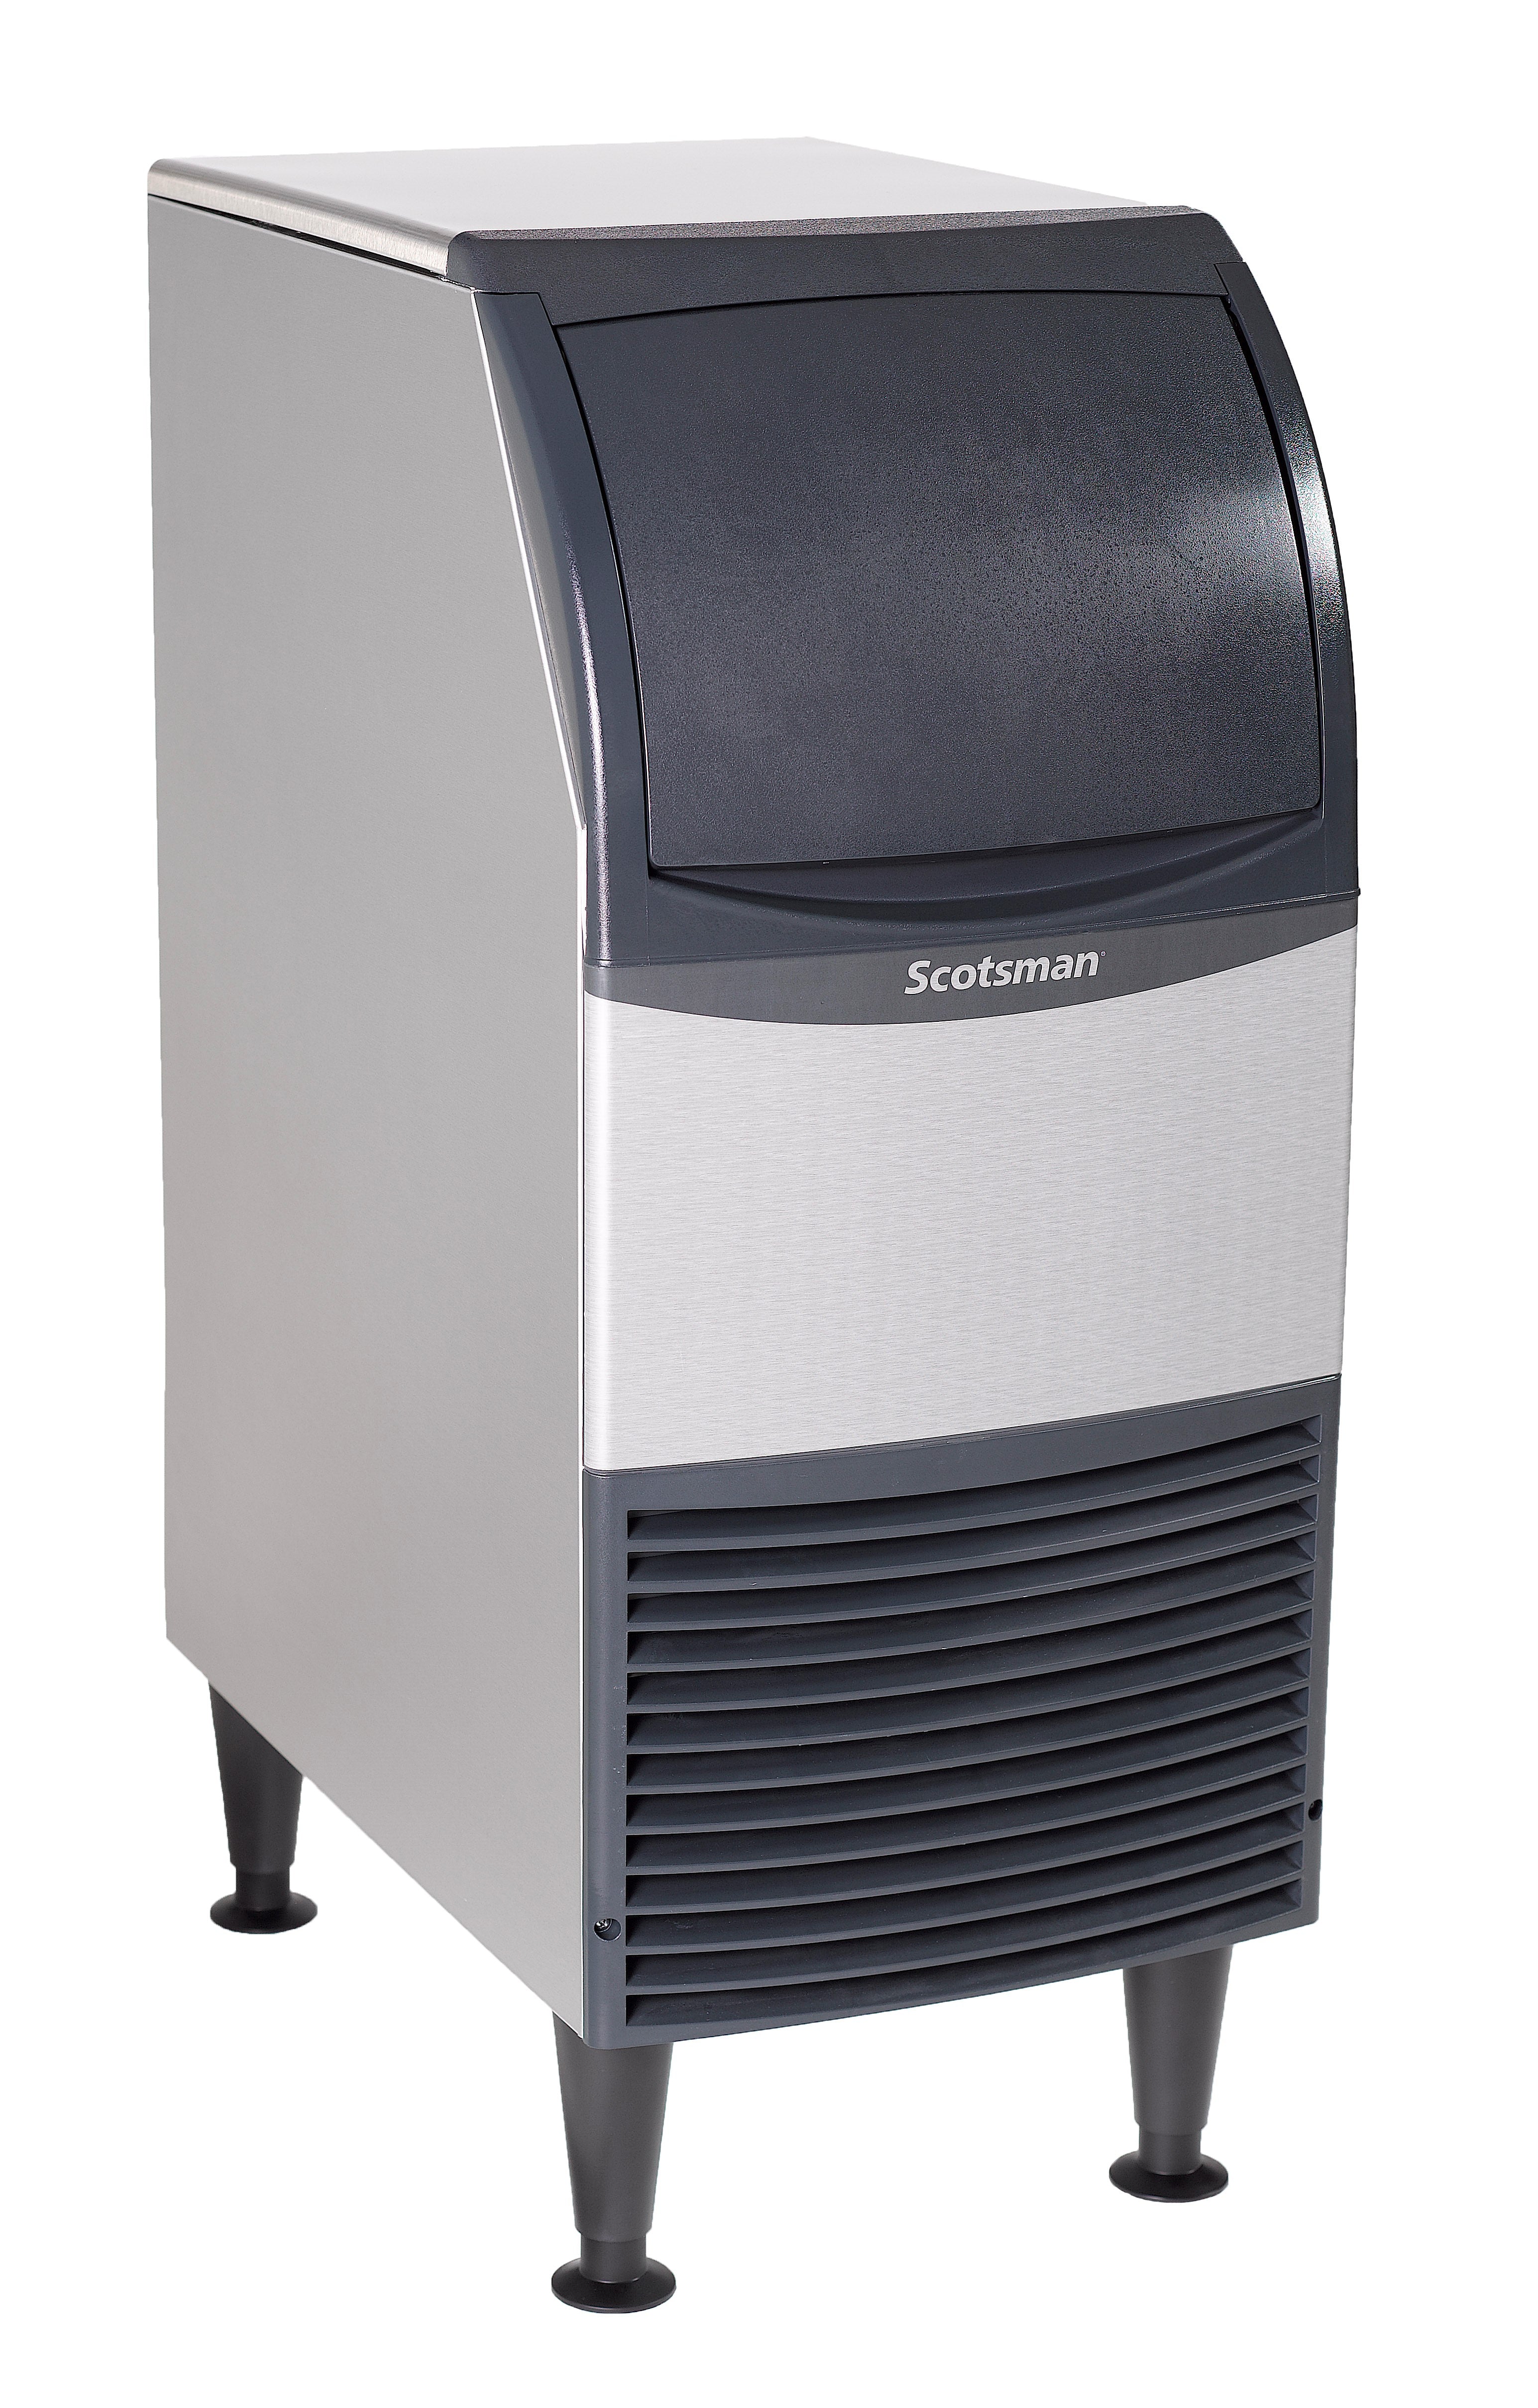 Scotsman UN1215A-1 Air Cooled Nugget Ice Maker with Bin Produces up to 119 Pounds of Ice Per Hour